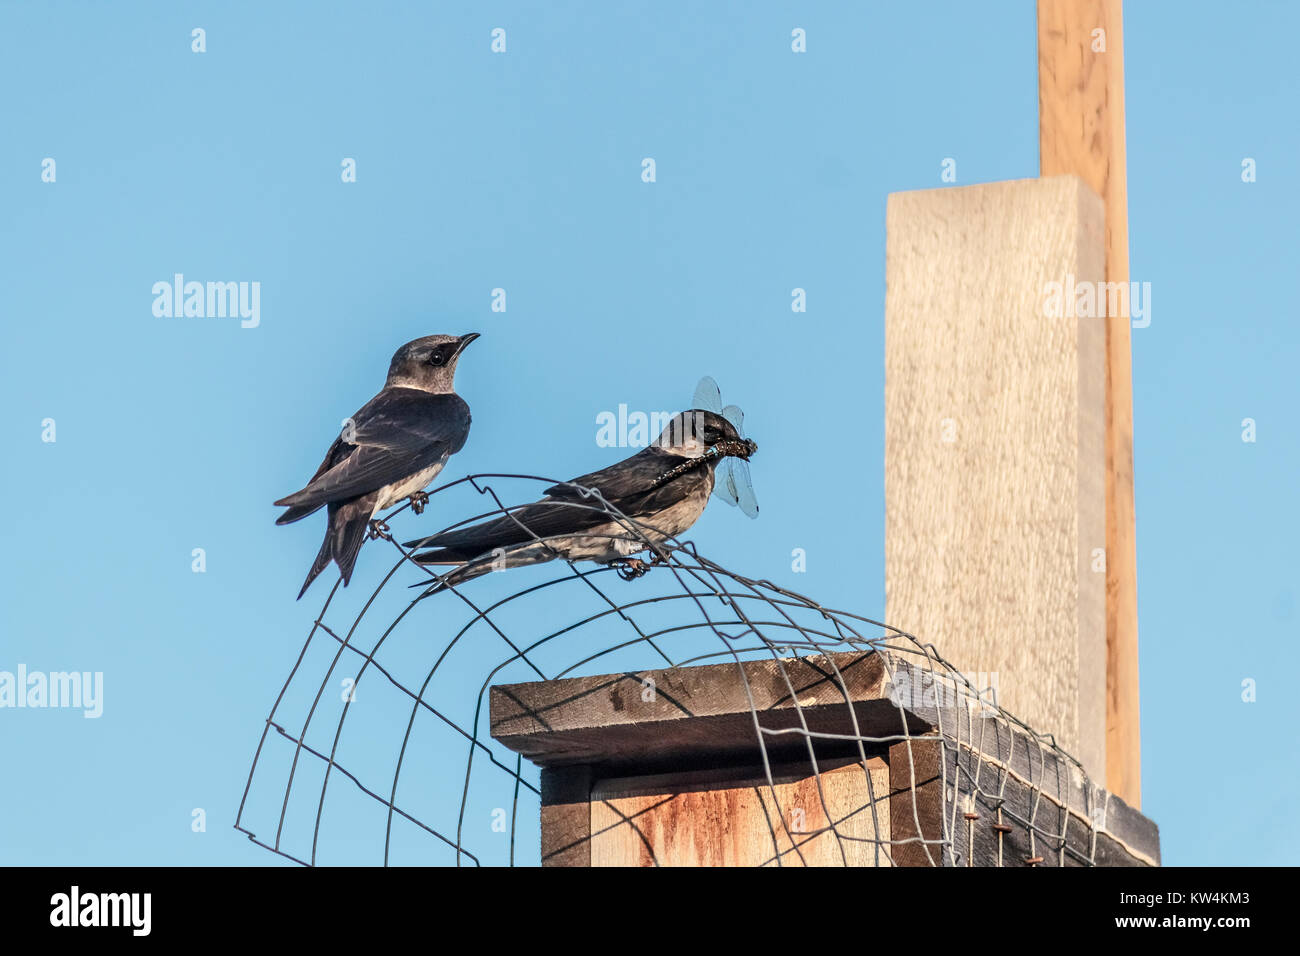 Two young Purple martins perch on the wire above a cedar nest-box, one with a dragonfly in its beak and ID bands on both legs (blue sky background). Stock Photo